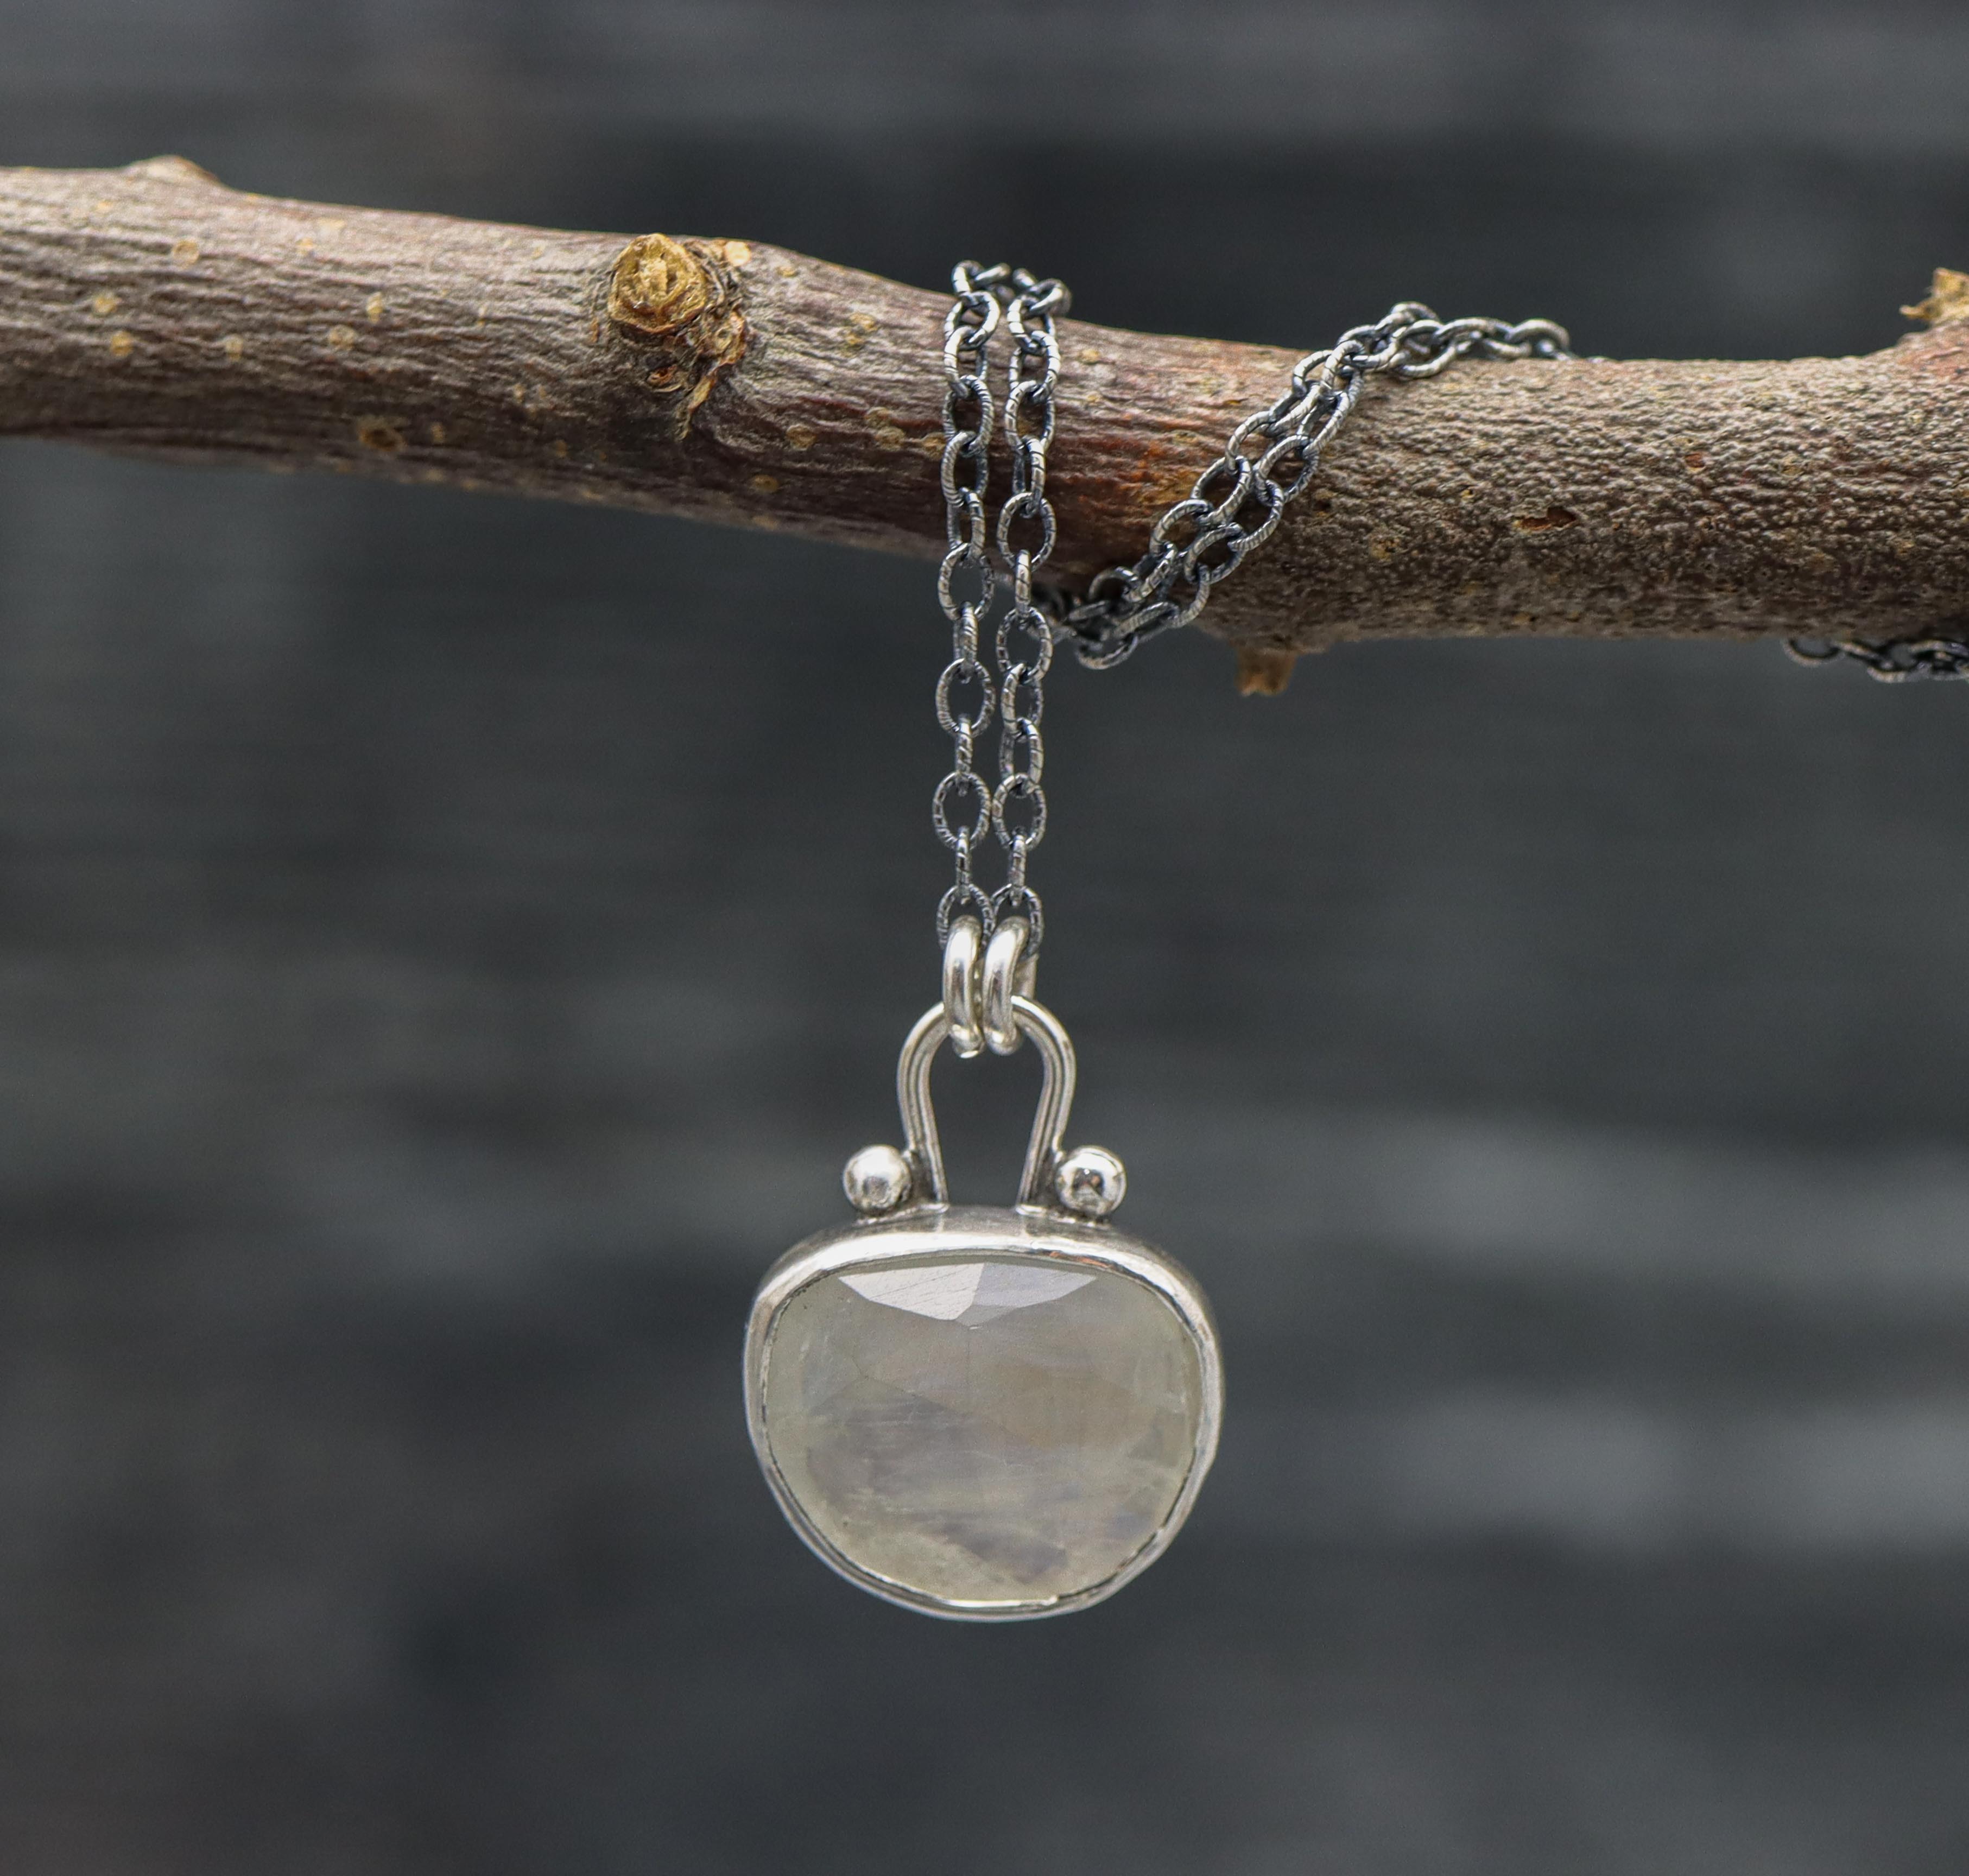 Rainbow Moonstone Pendant Necklace Sterling Silver